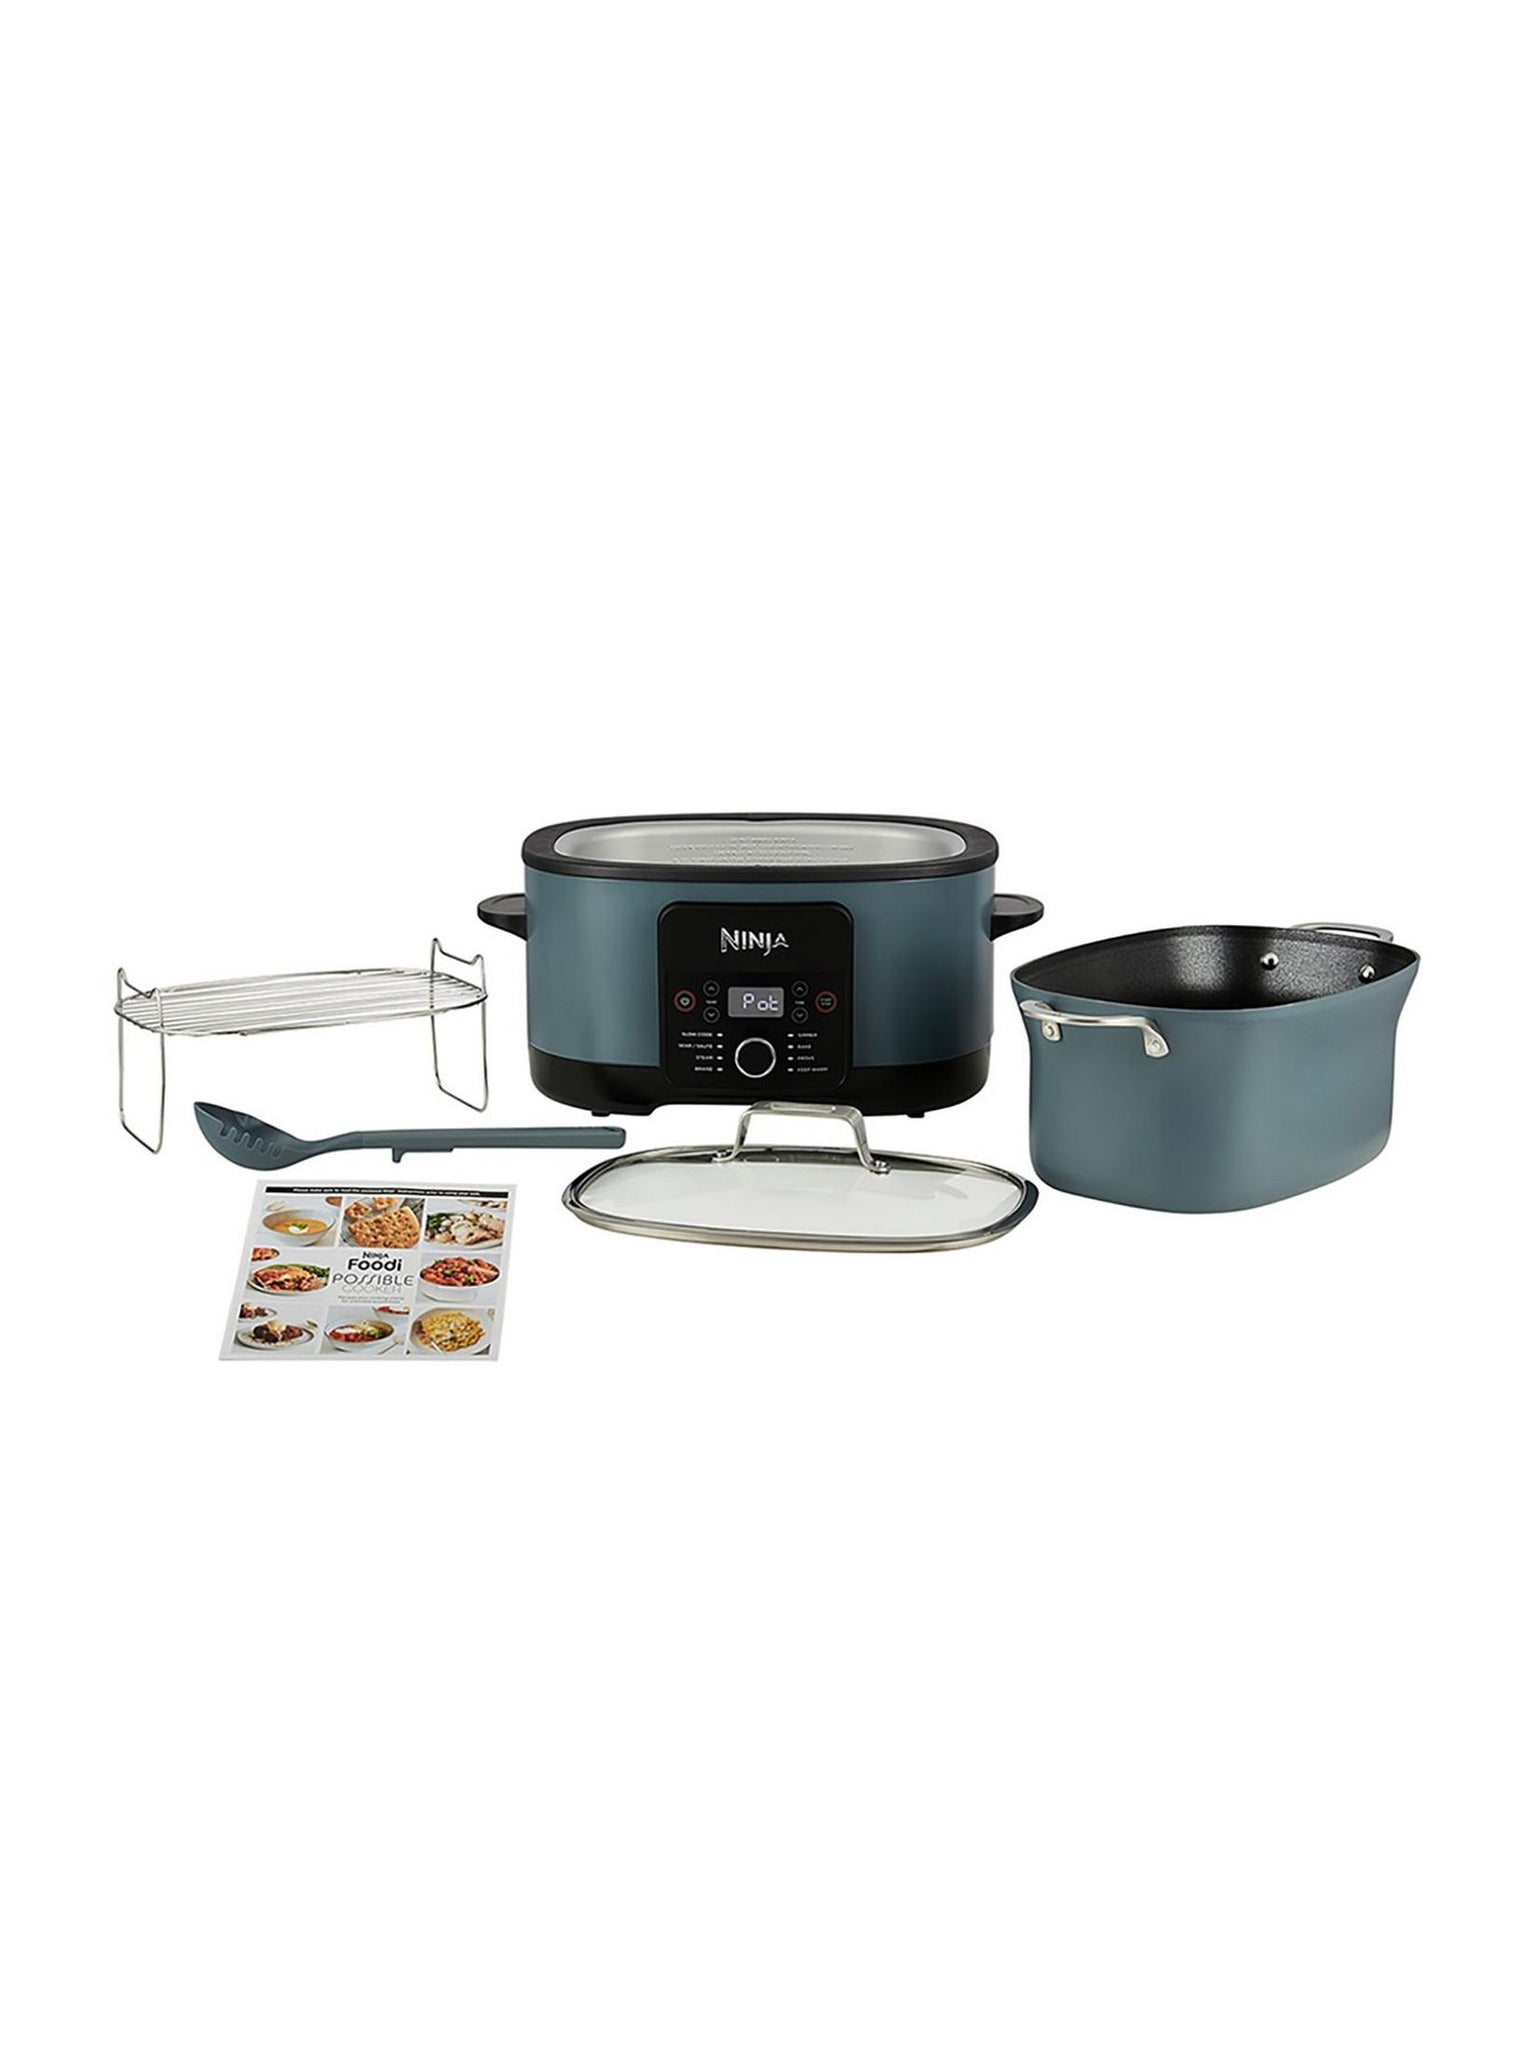 Sell-out Ninja Foodi PossibleCooker has just been reduced - and